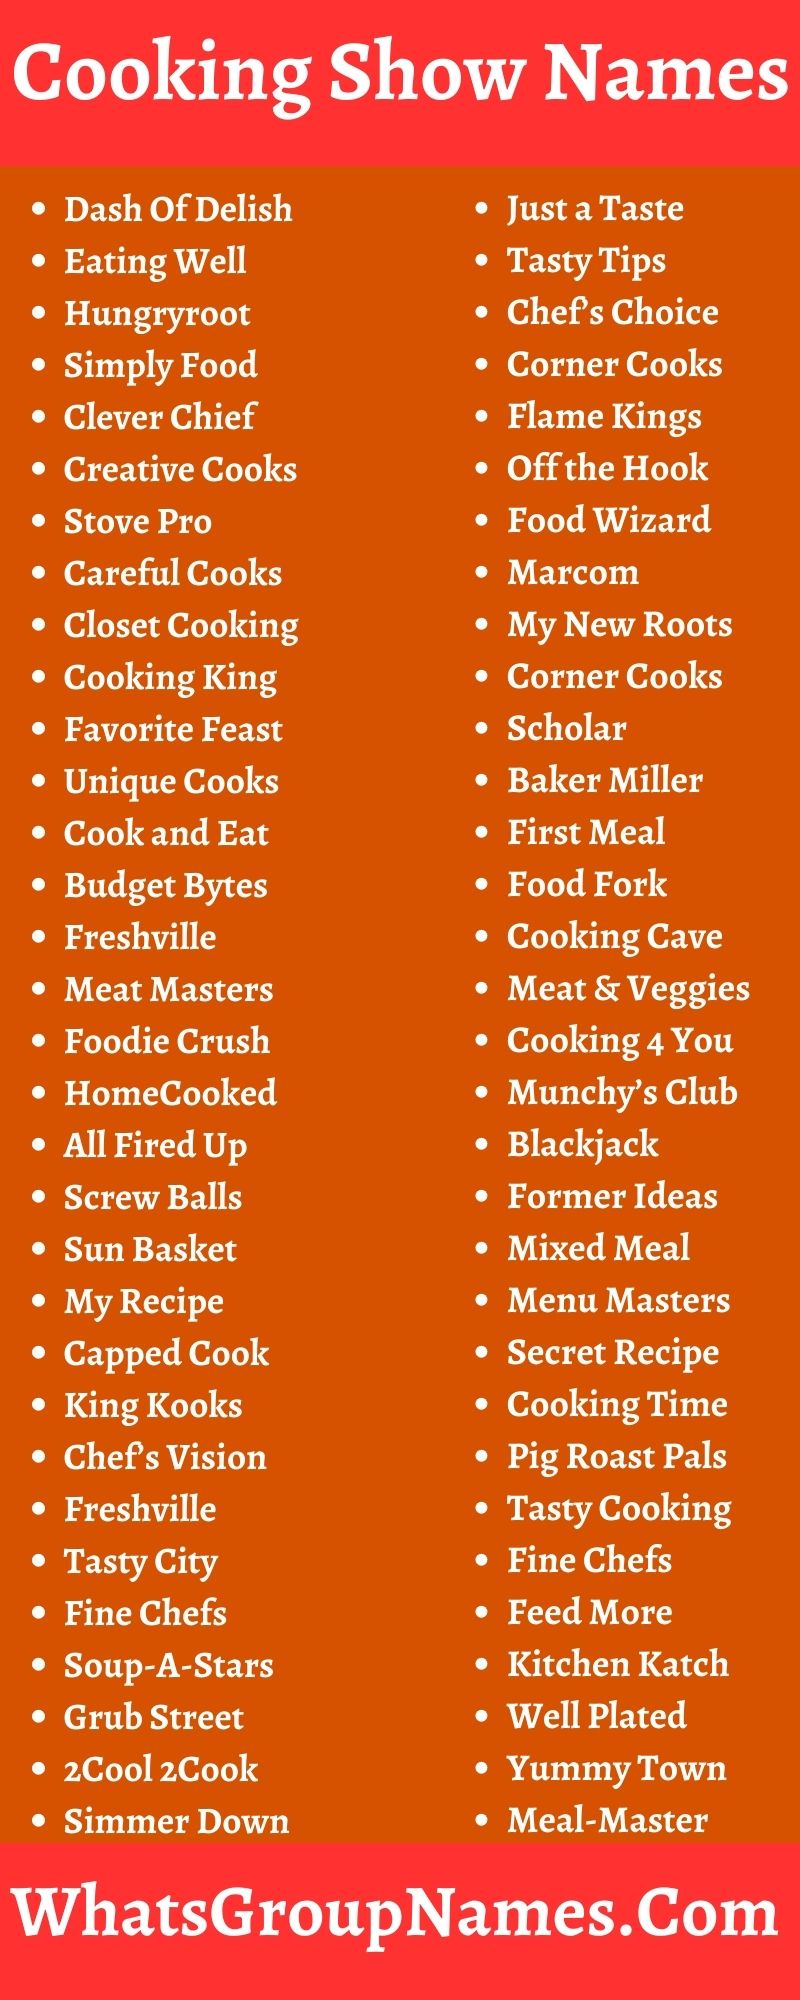 Cooking Show Names